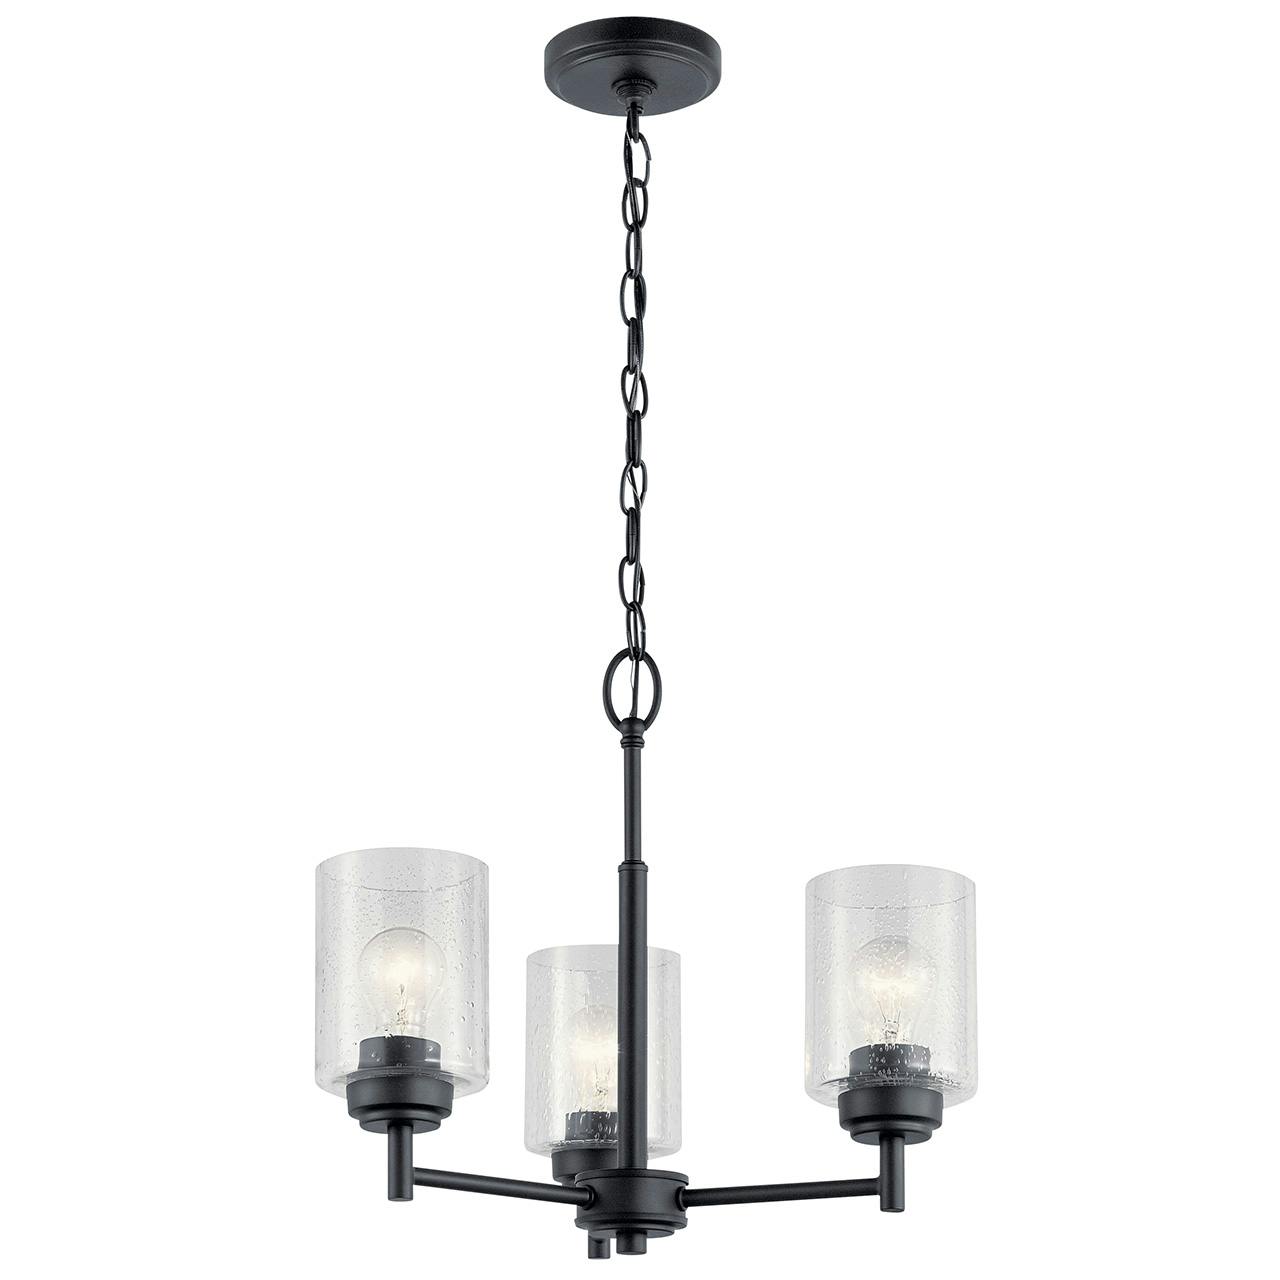 The Winslow™ 3 Light Mini Chandelier Black facing up on a white background